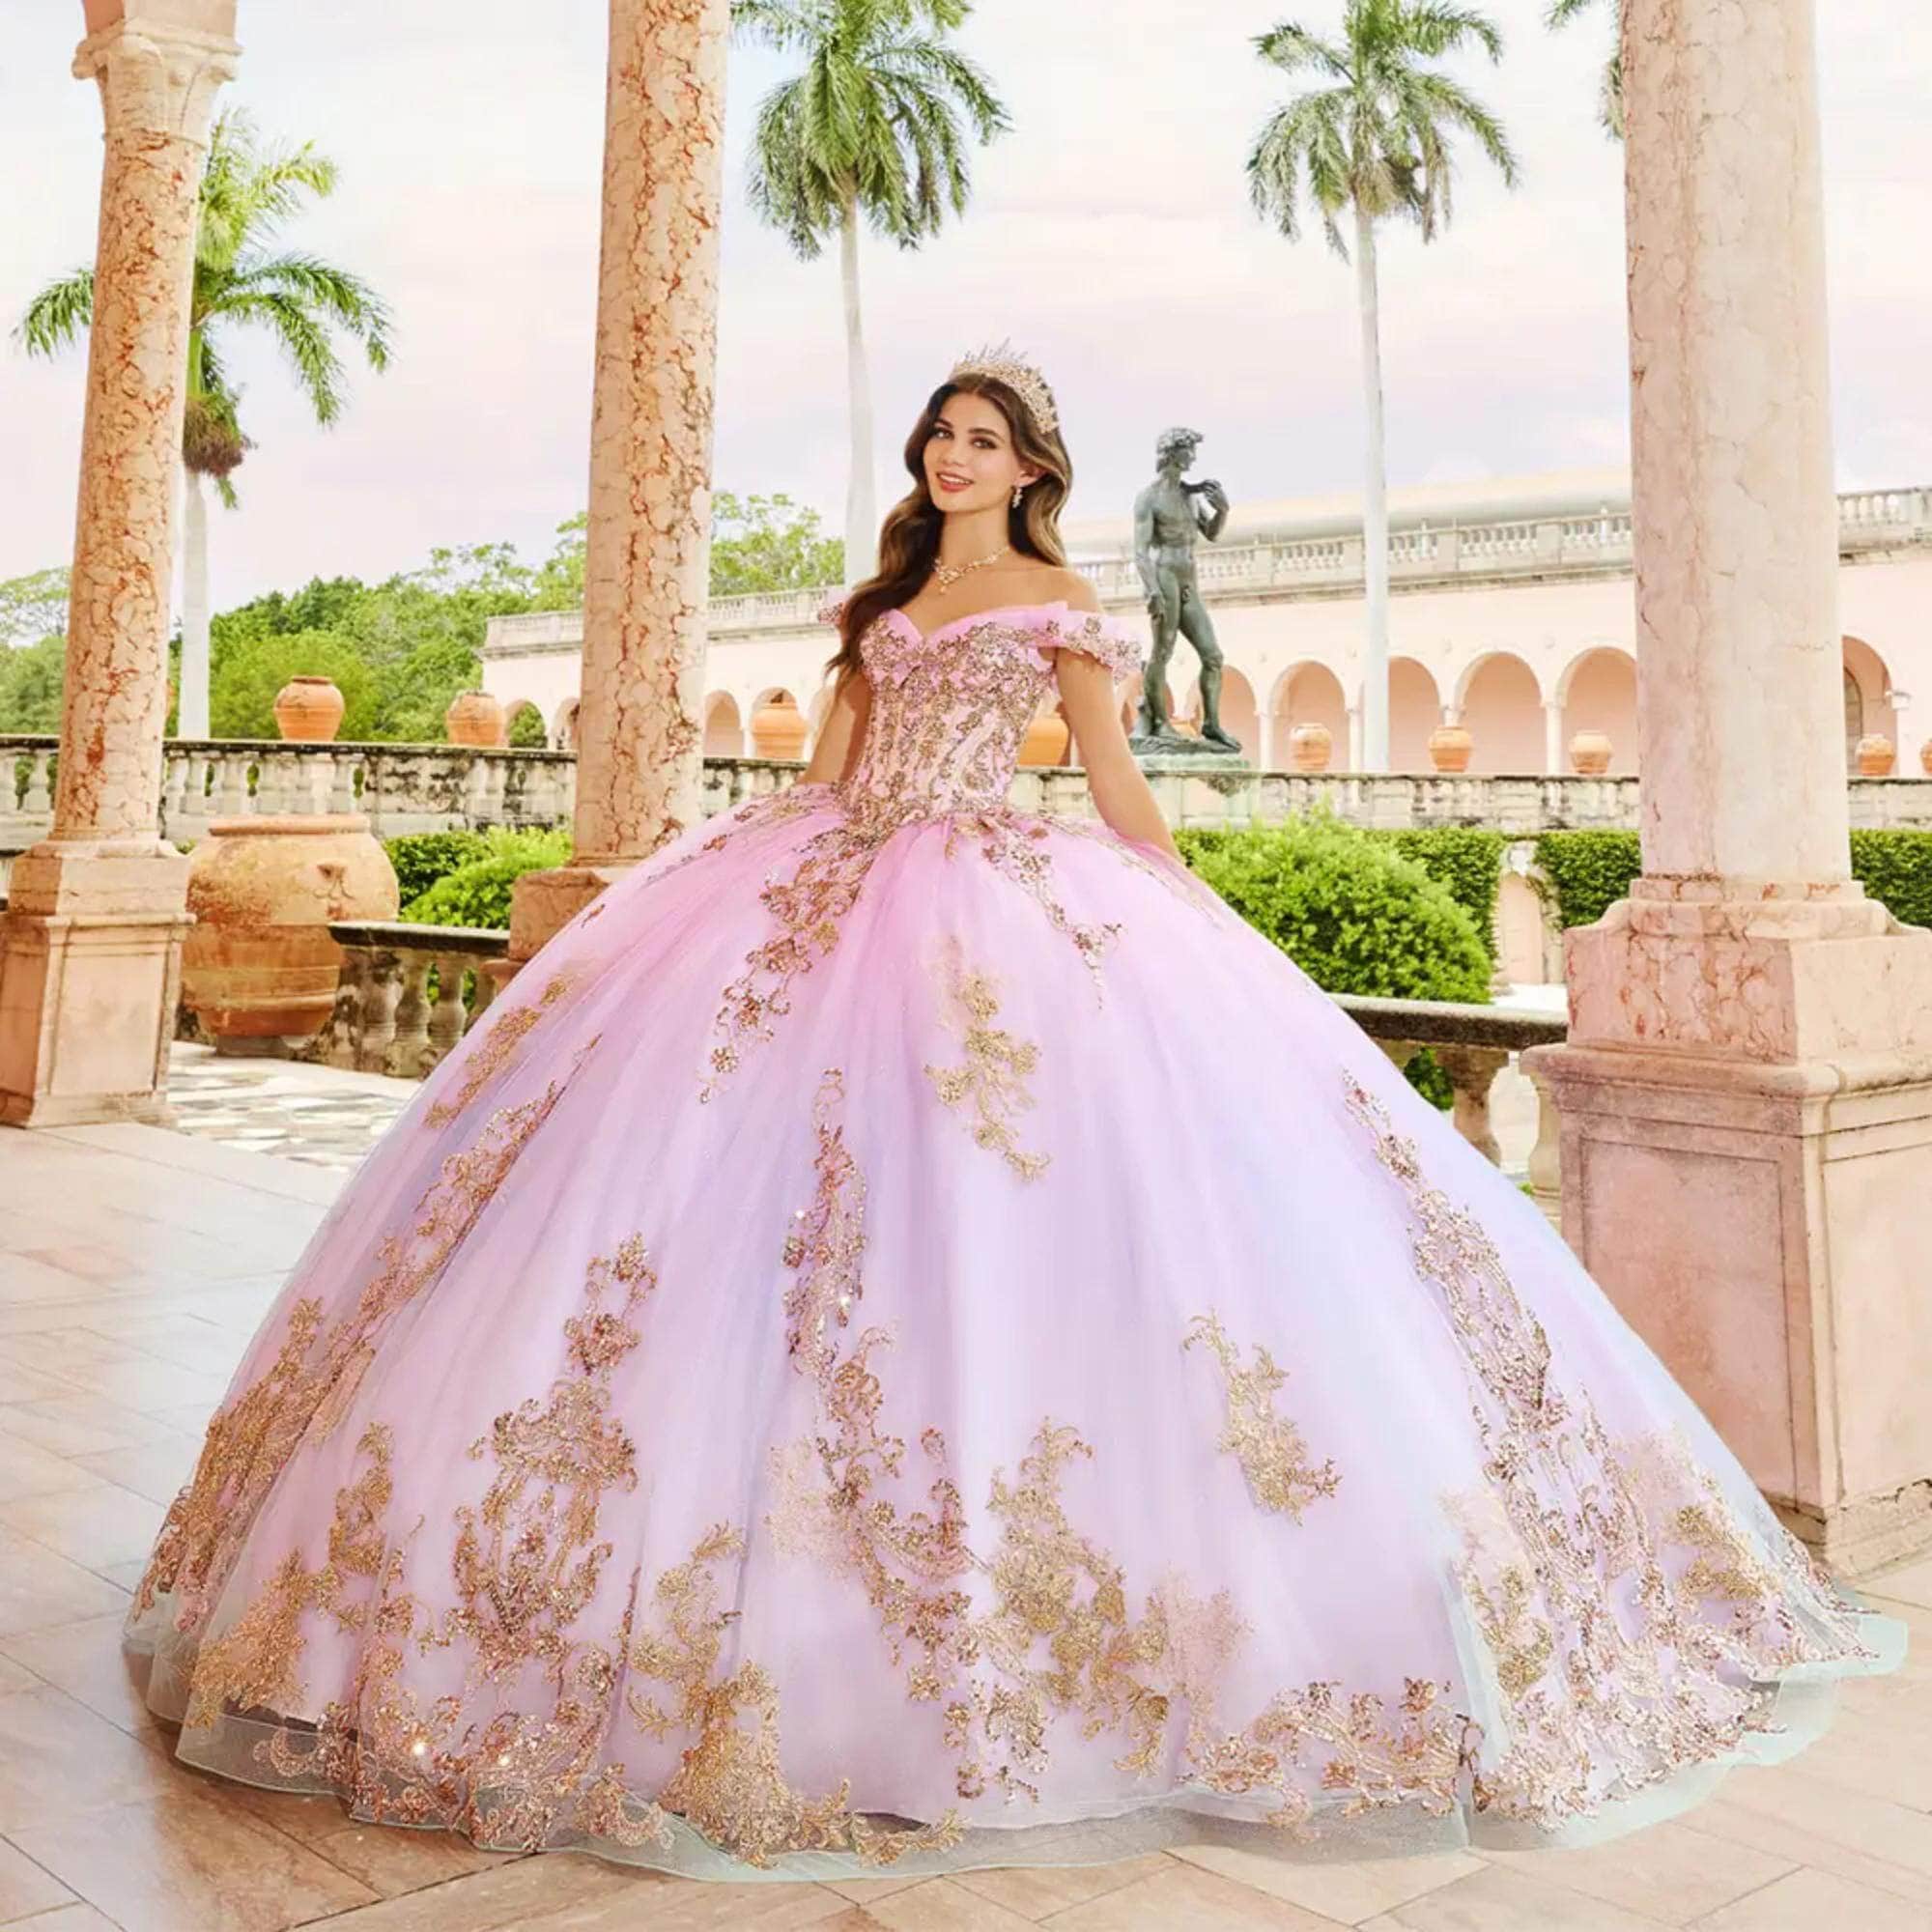 Image of Princesa by Ariana Vara PR30152 - 3D Floral Lace-Up Tie Prom Gown